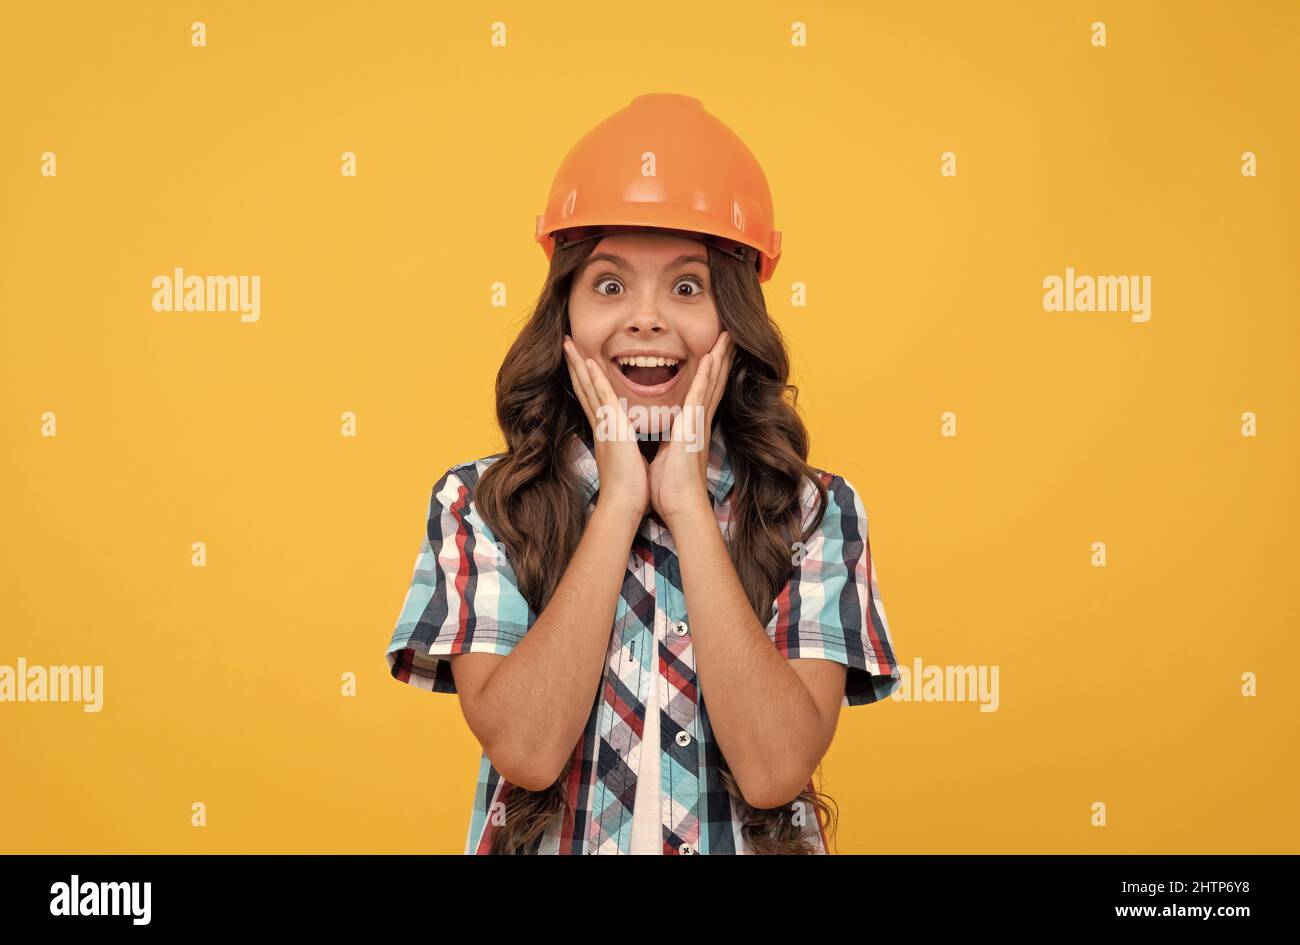 surprised teen girl with curly hair in construction helmet, carpenter Stock Photo